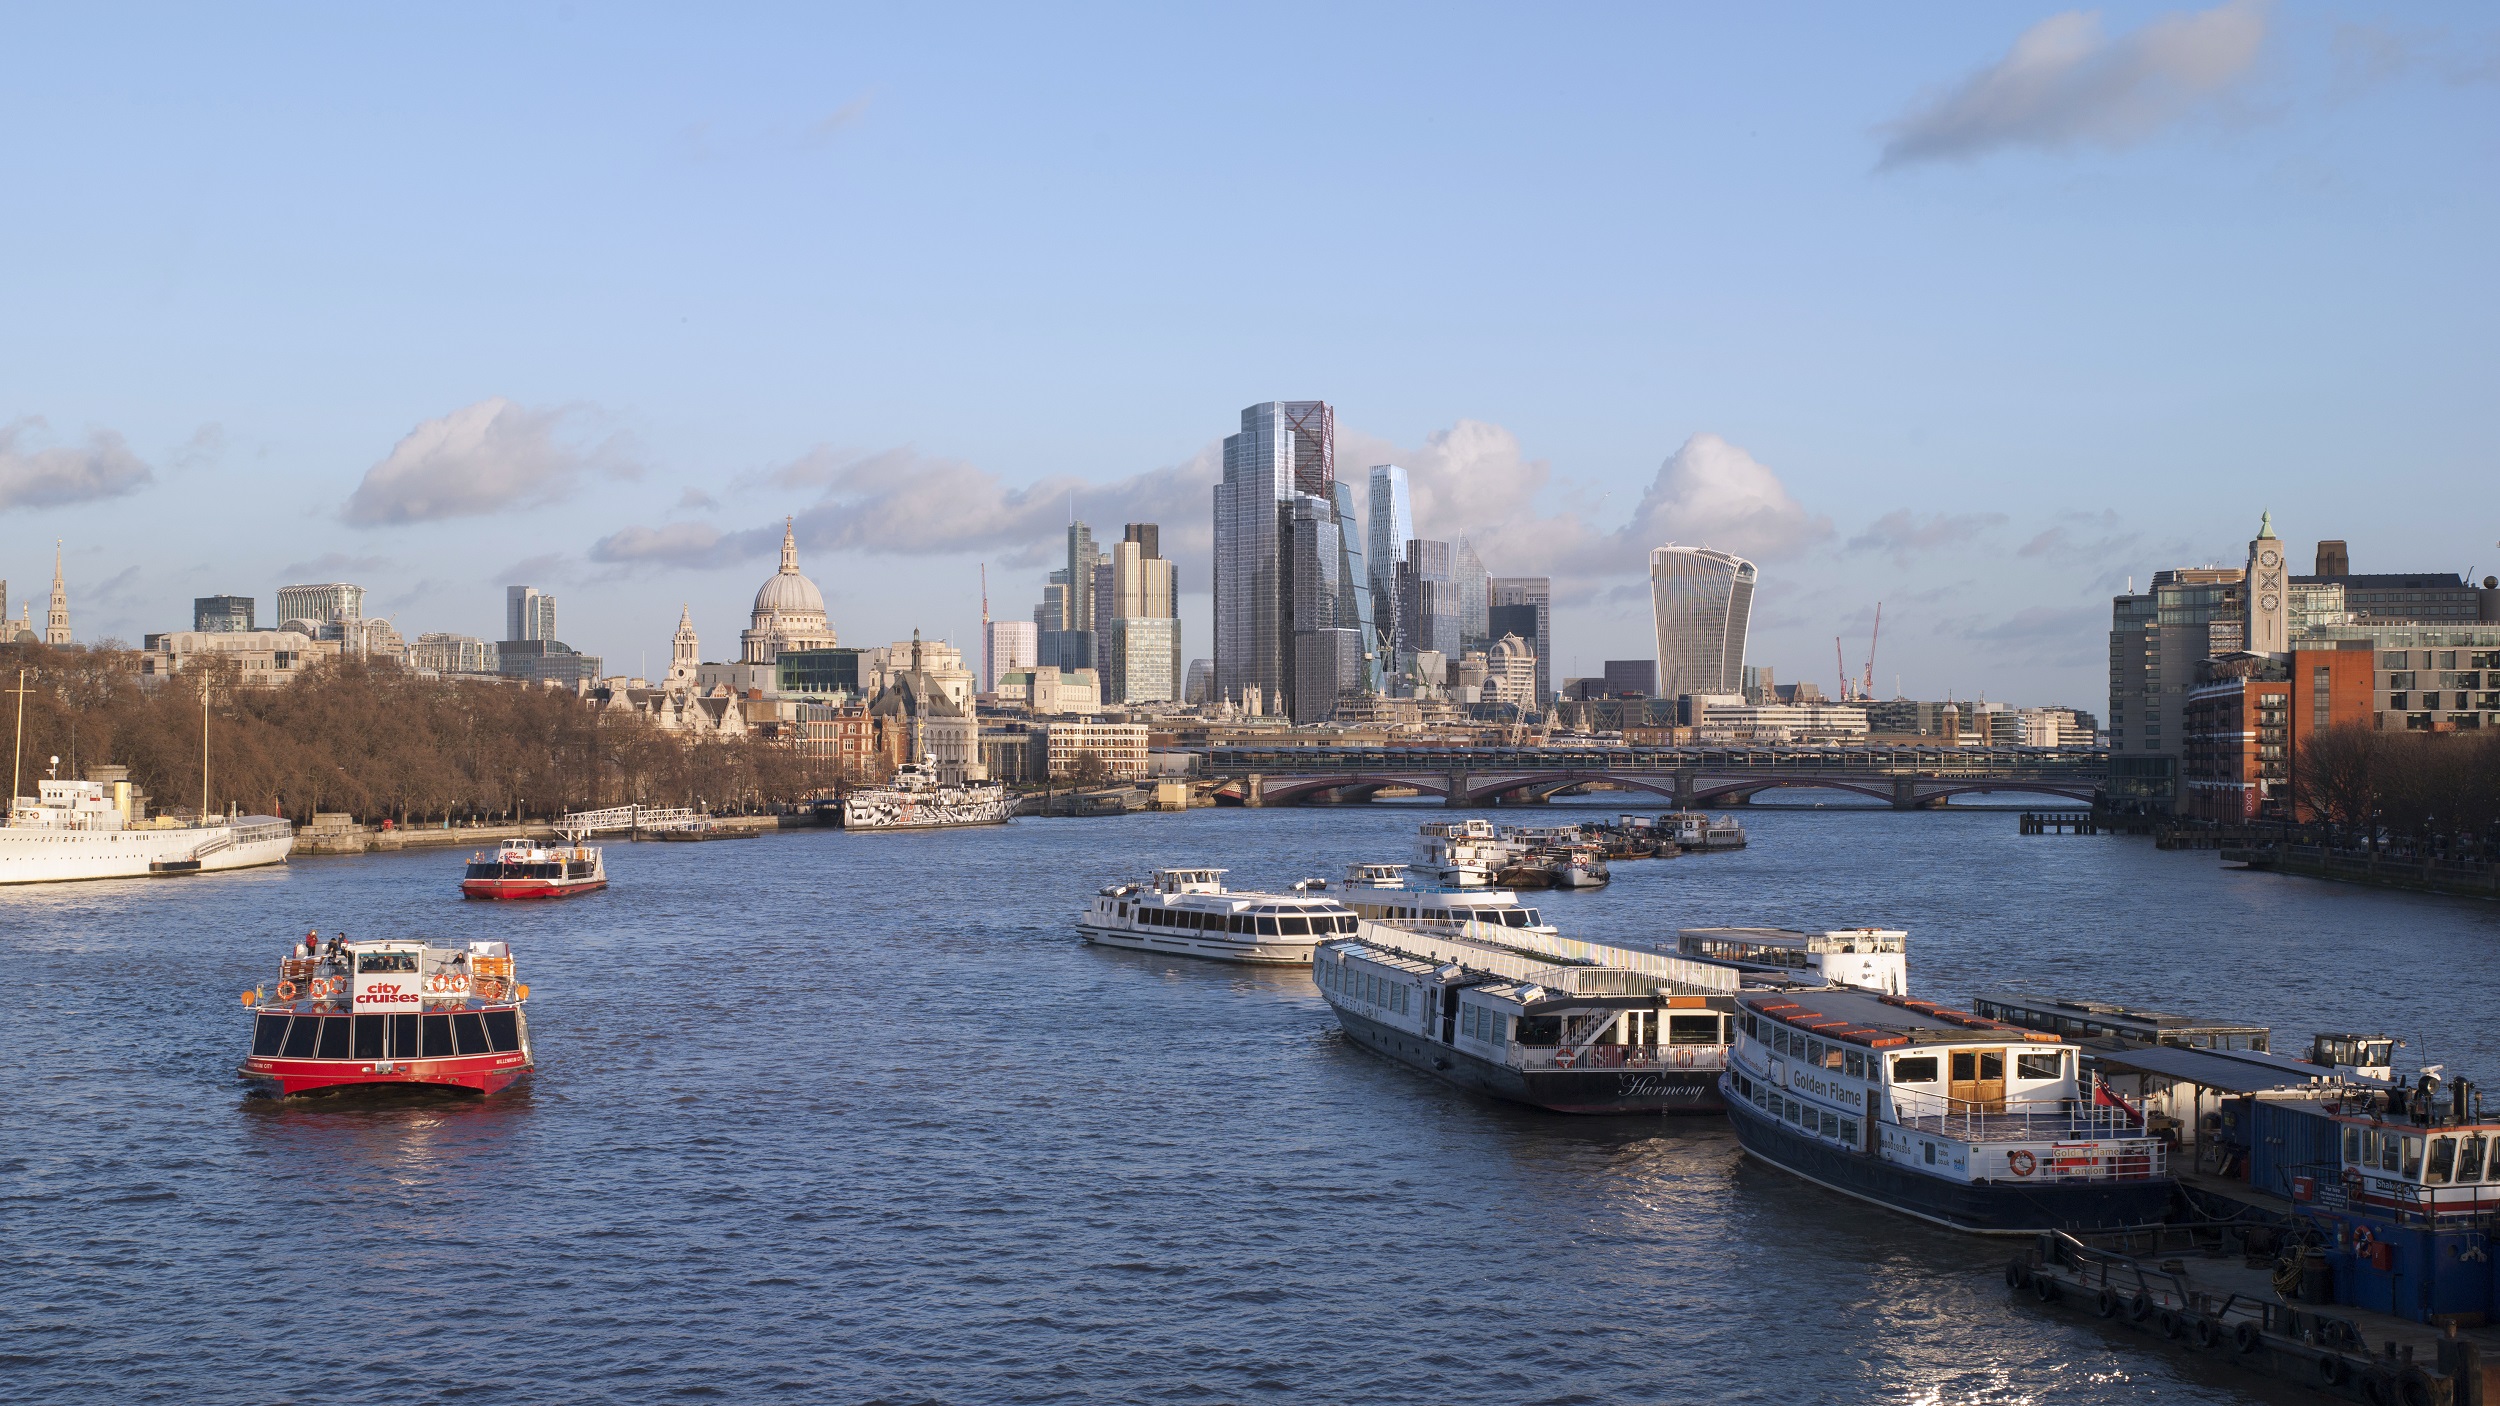 And finally... New images depict of future City of London skyline